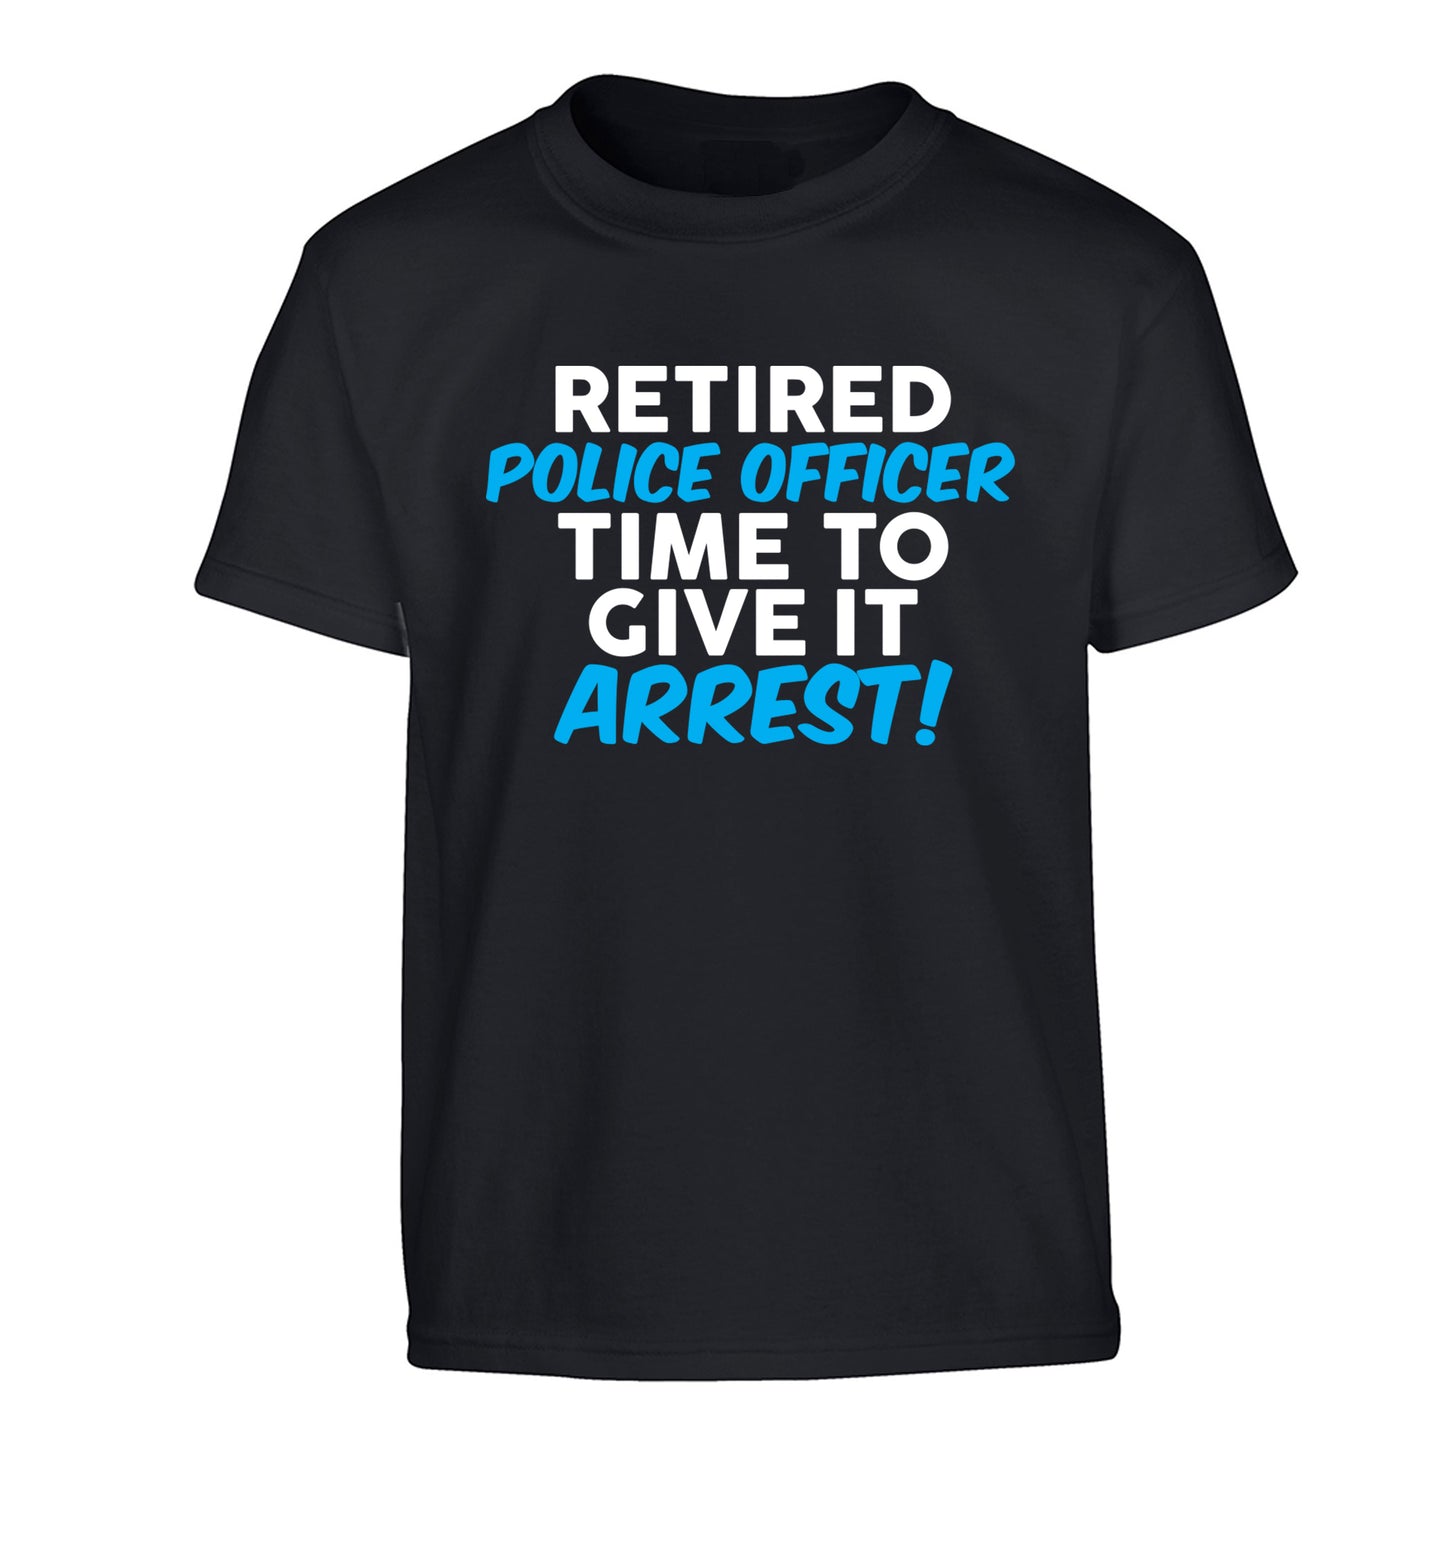 Retired police officer time to give it arrest Children's black Tshirt 12-13 Years